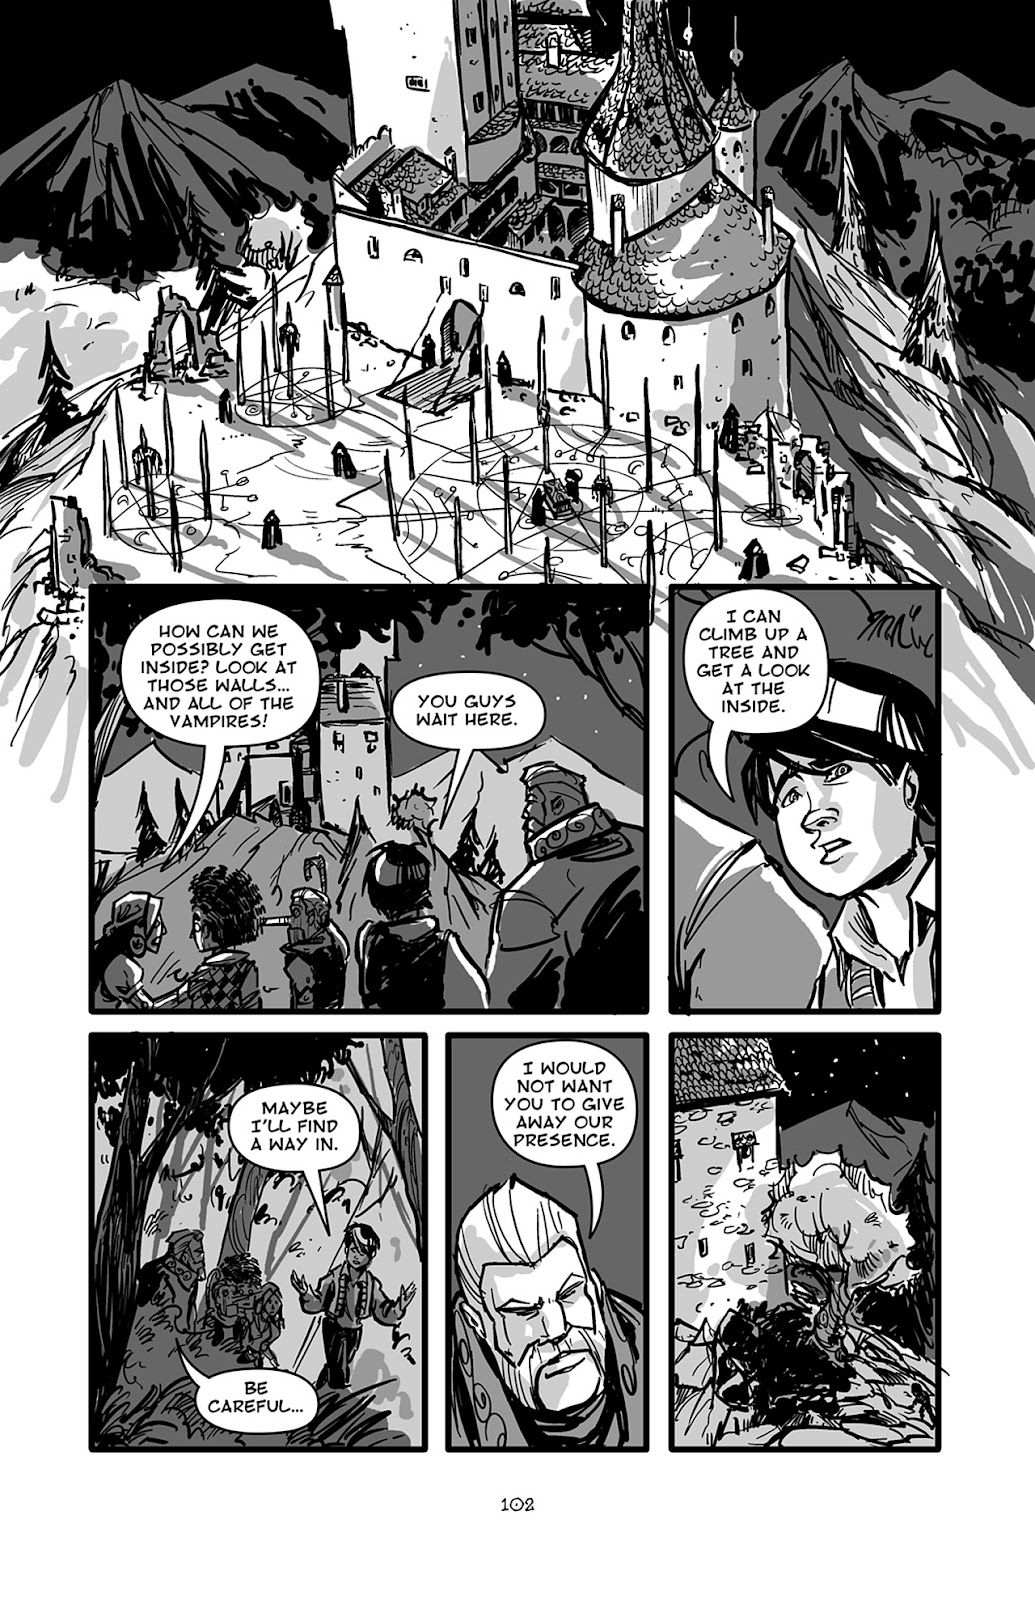 Pinocchio: Vampire Slayer - Of Wood and Blood issue 5 - Page 3